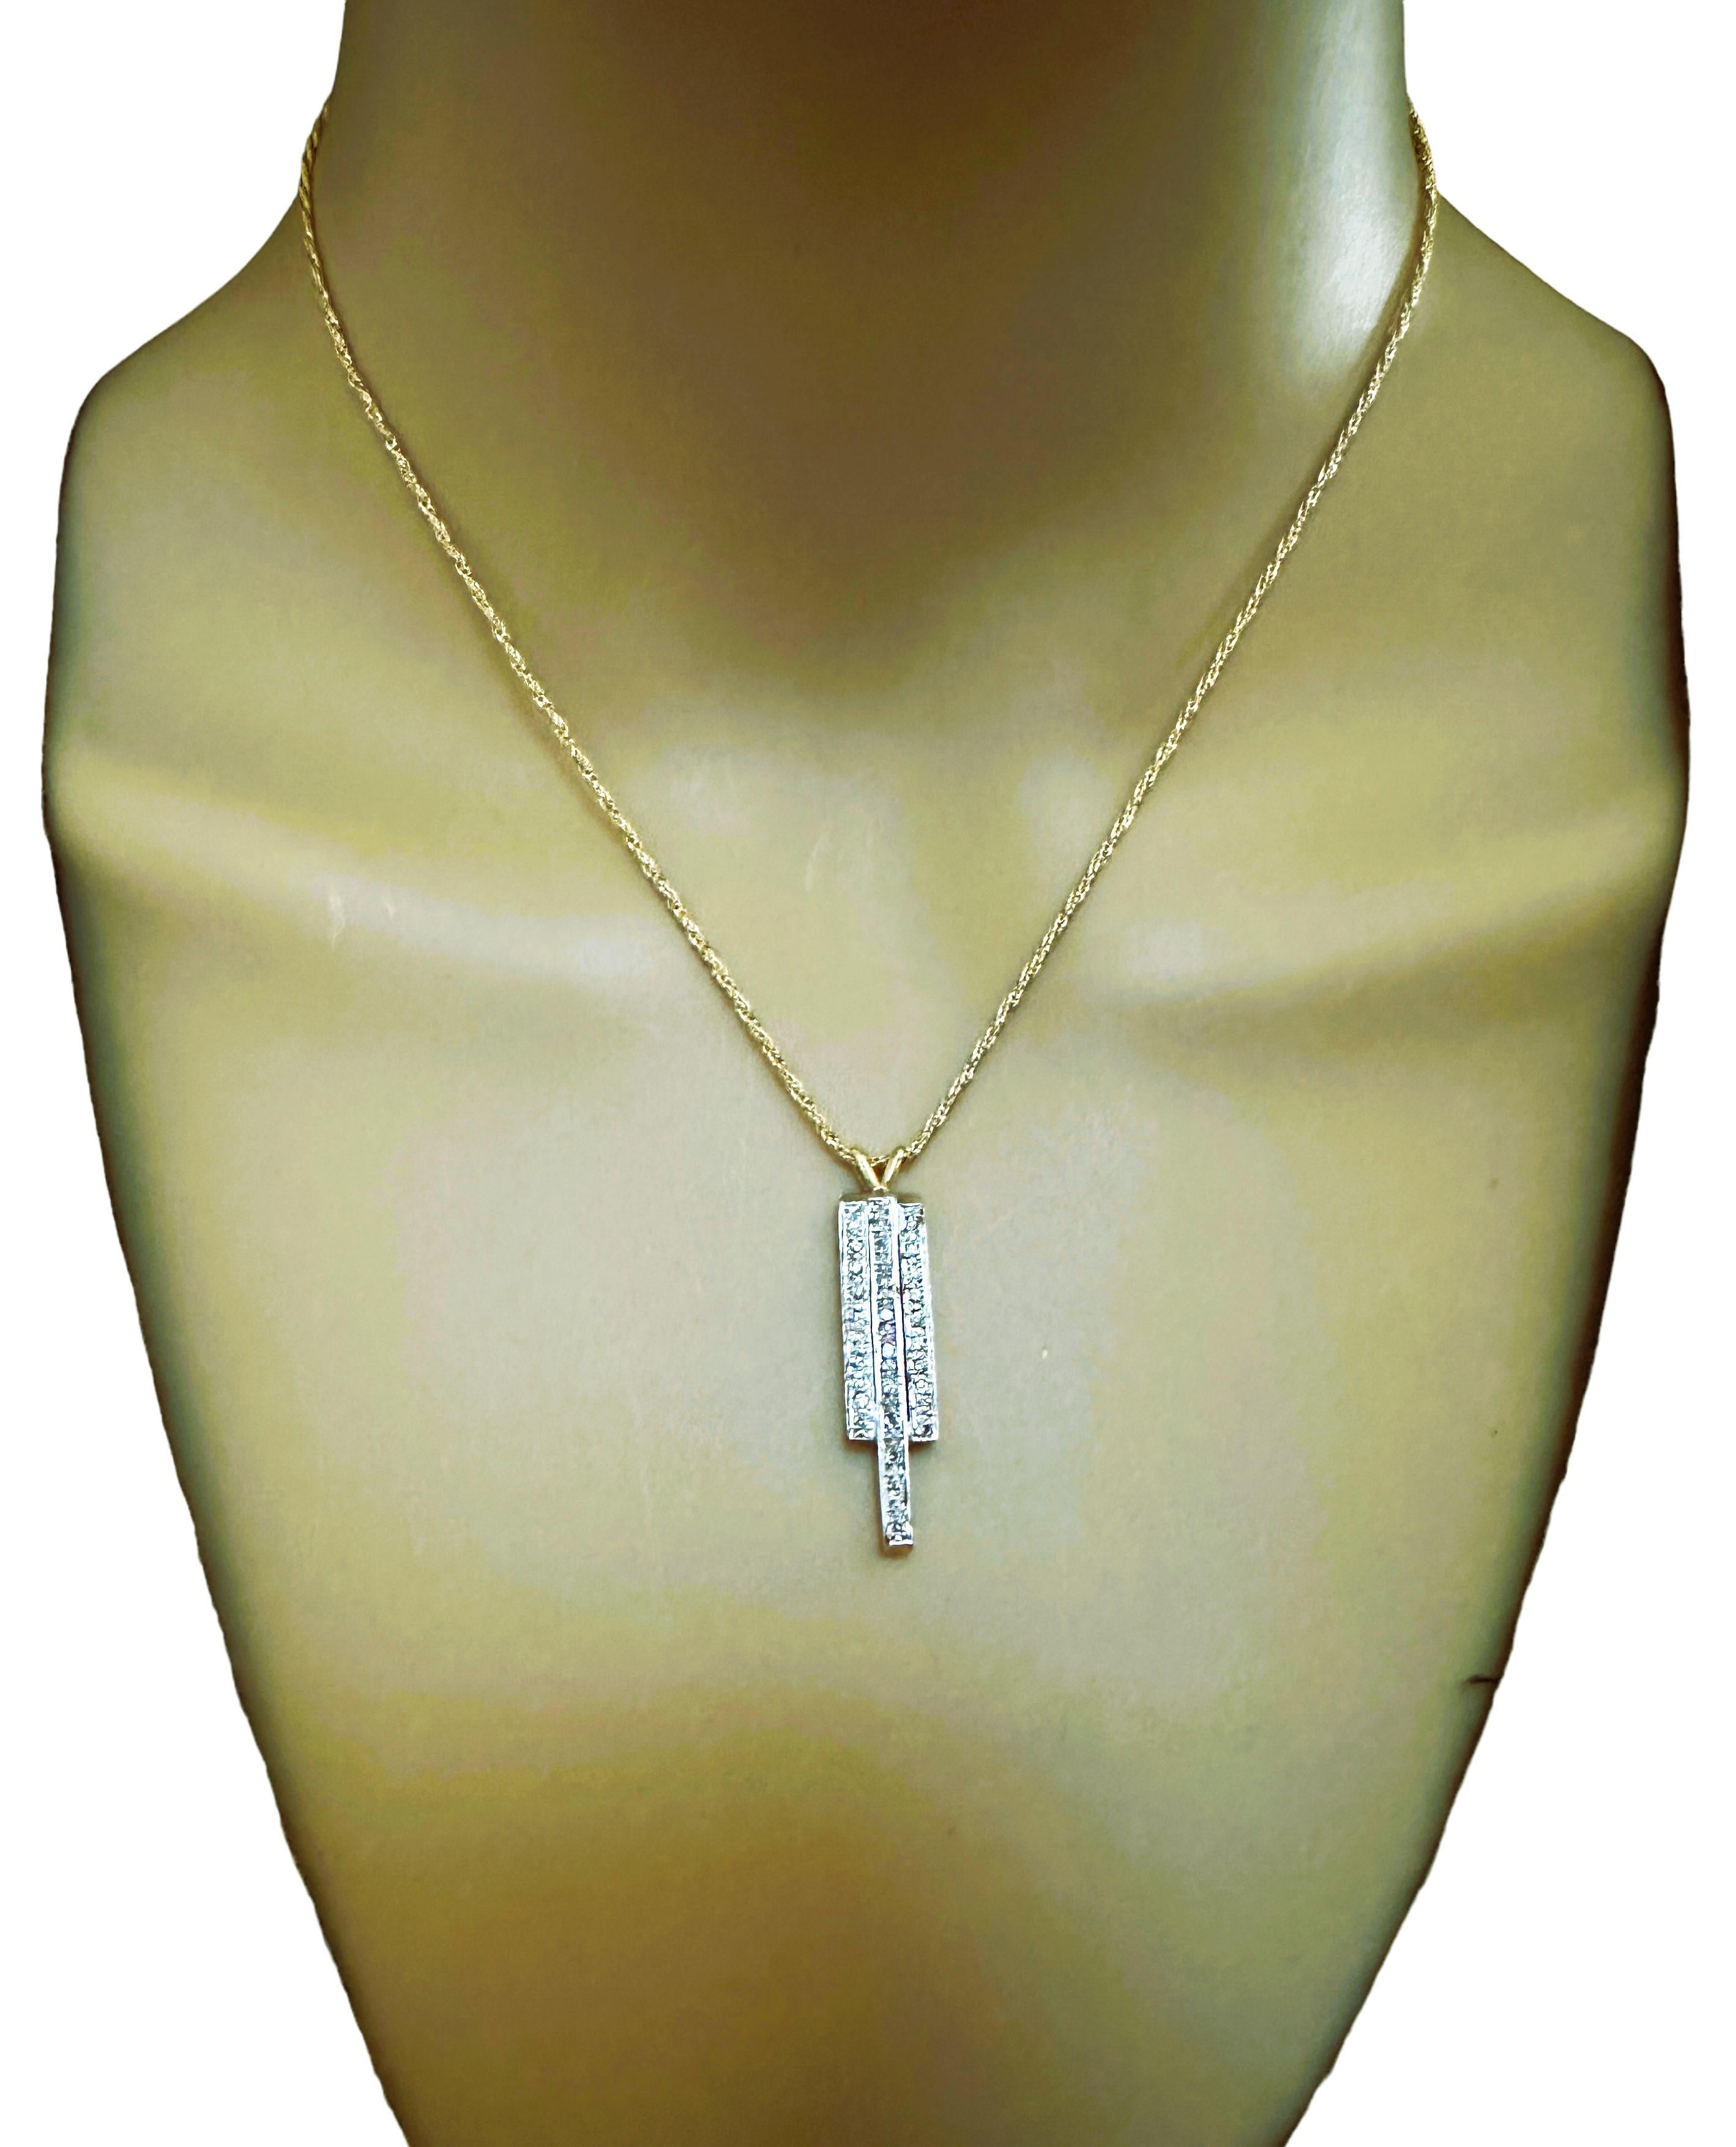 Italian Modern 14k Two Tone Gold 1.25 ct Diamond Necklace with Appraisal For Sale 4